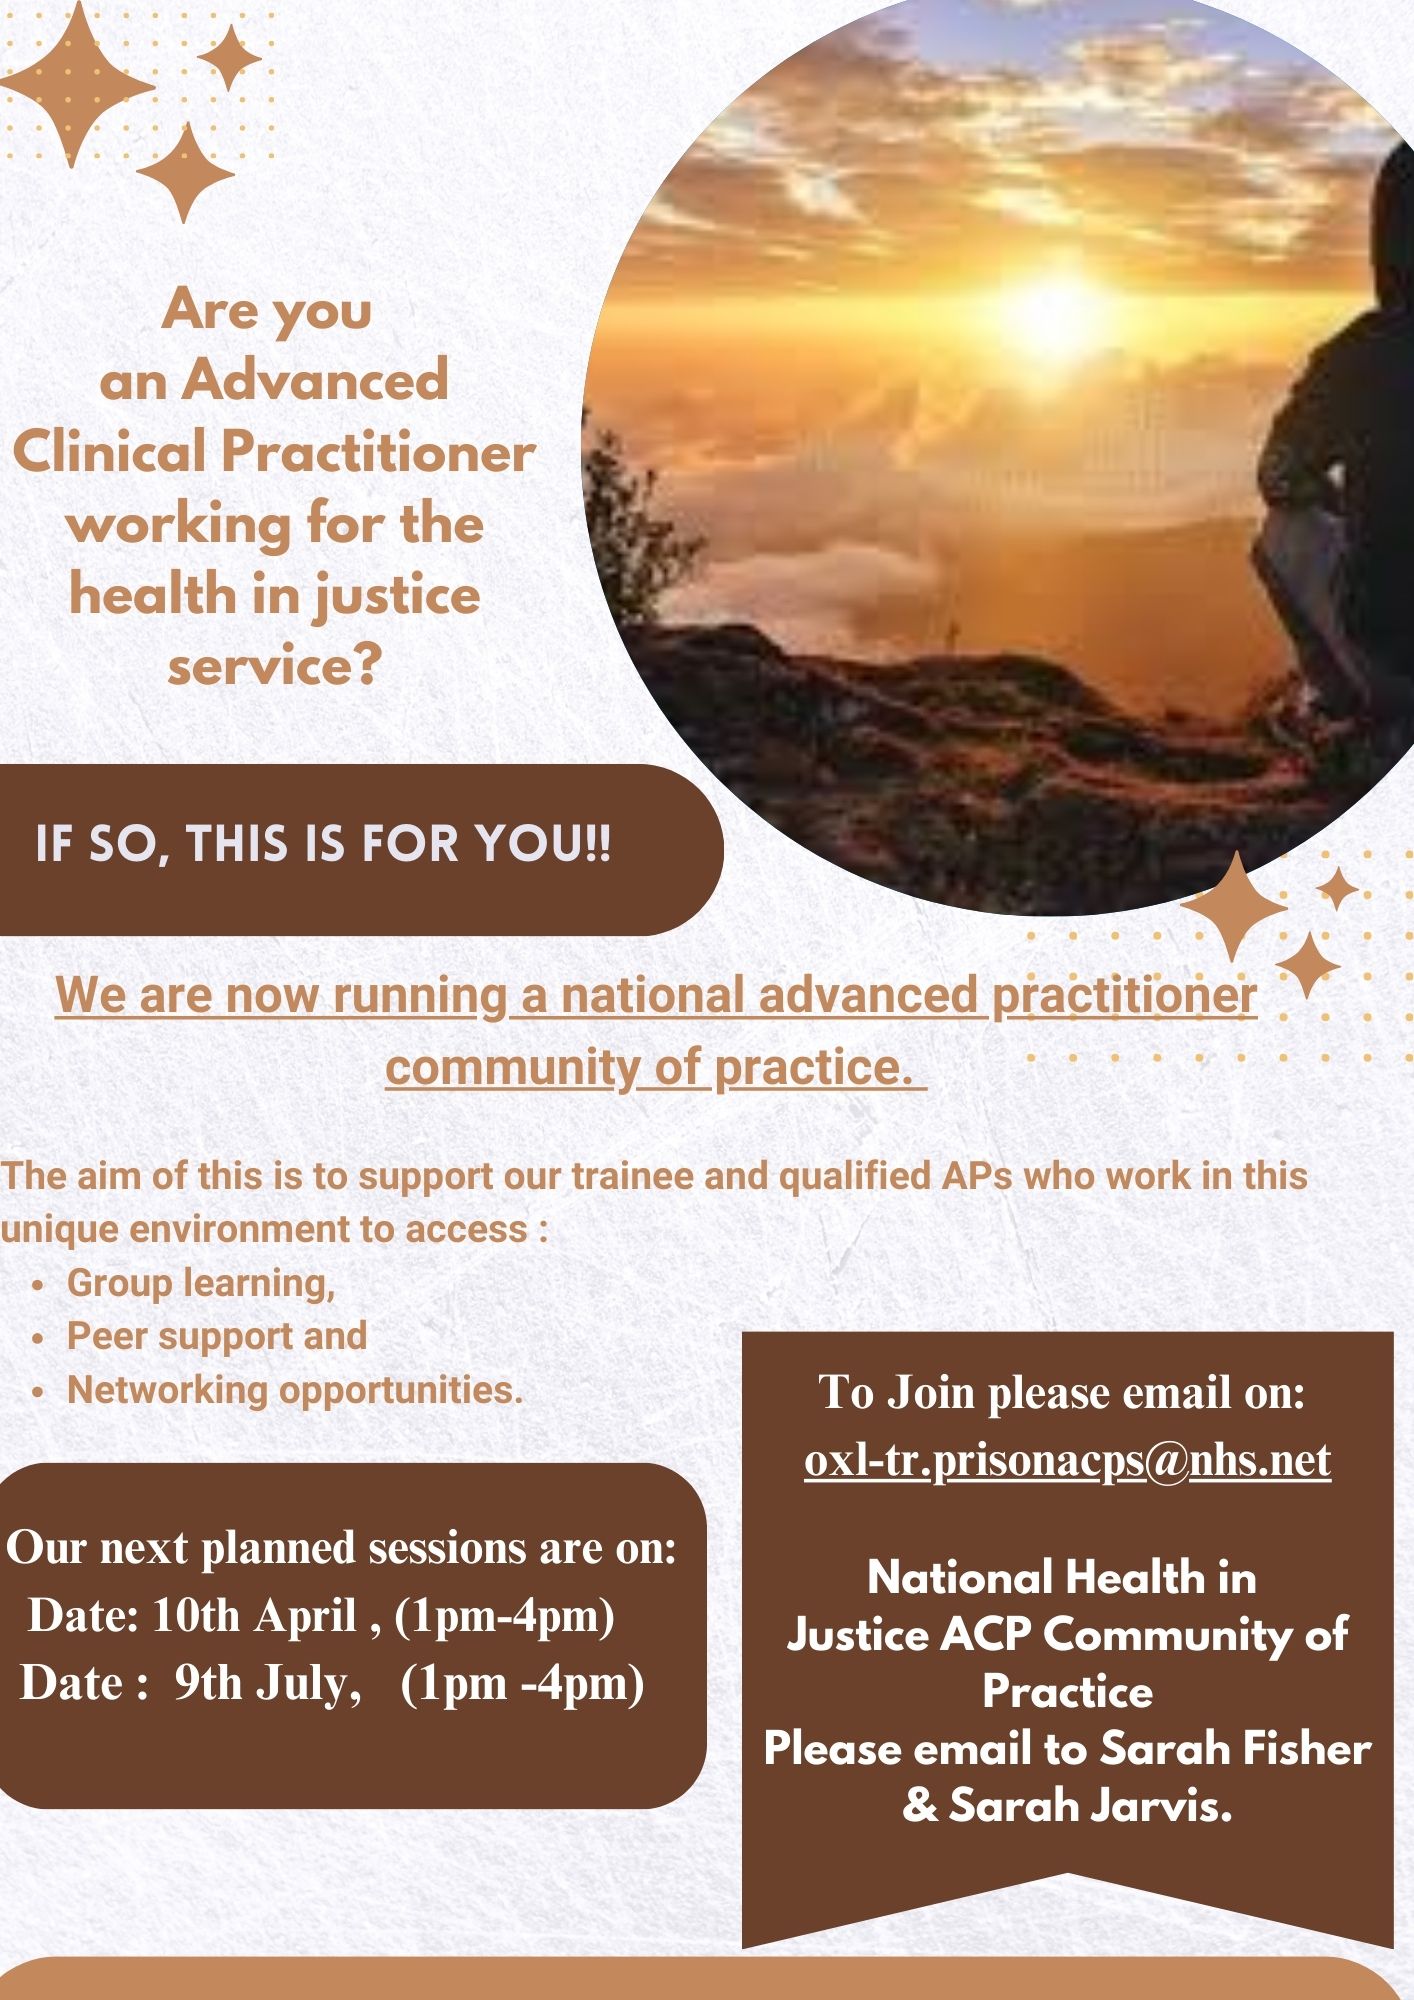 Register to a  National Advanced Practitioner community of practice Sessions on 10th April & 9th July.